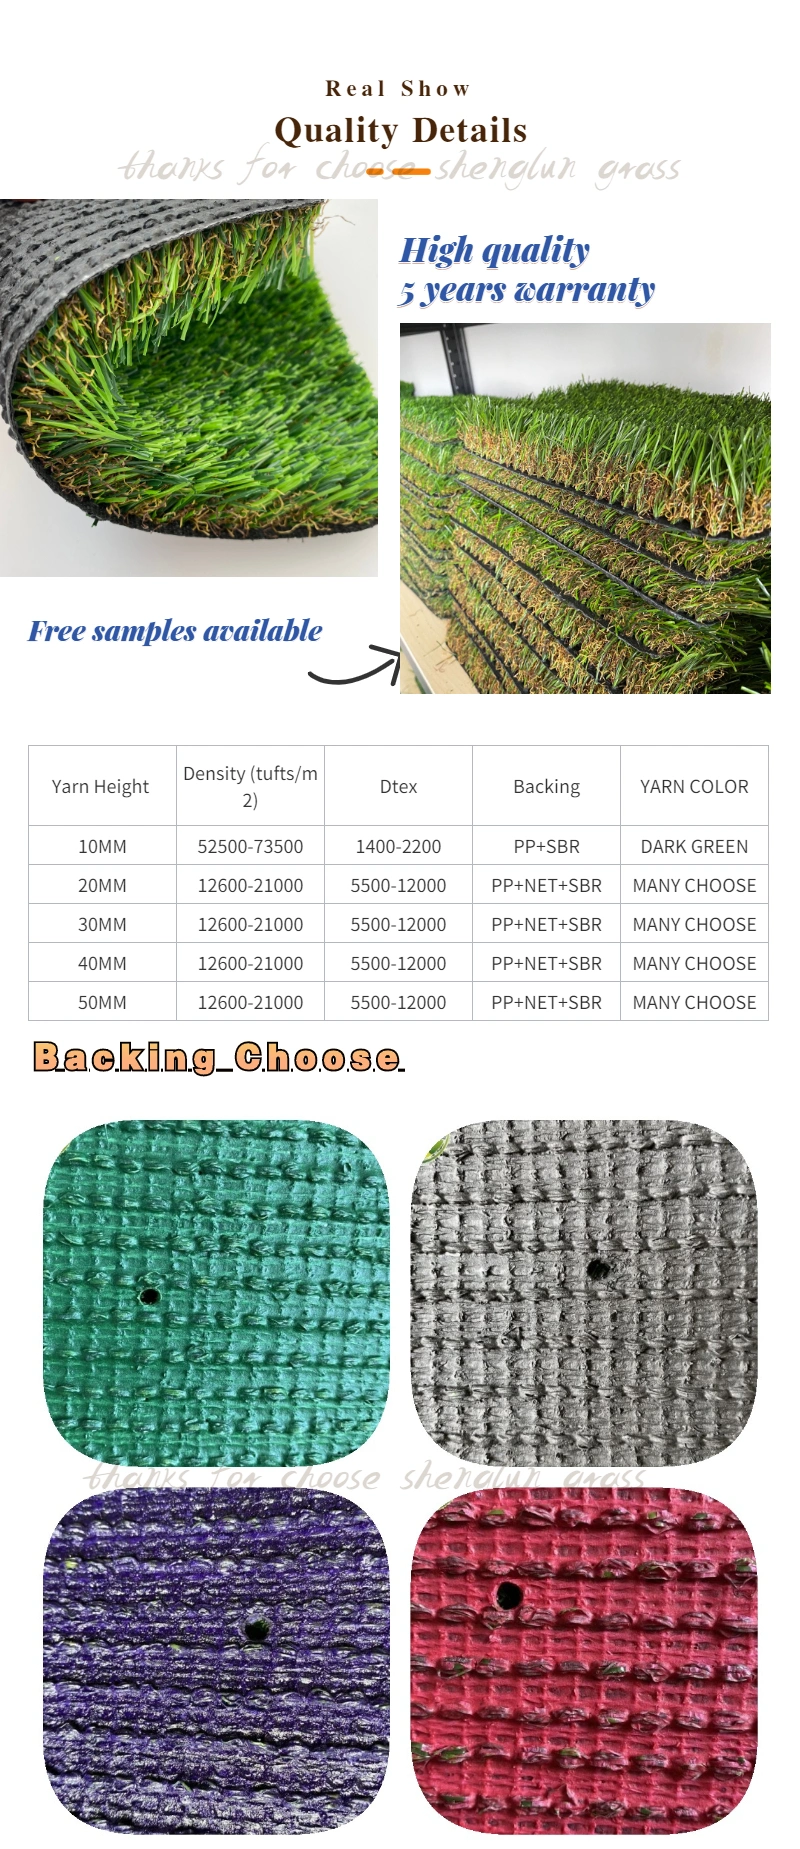 Factory Wholesale Price Pet Friendly Fake Grass Artificial Grass for Terrace, Veranda Fire Resistant and Durable